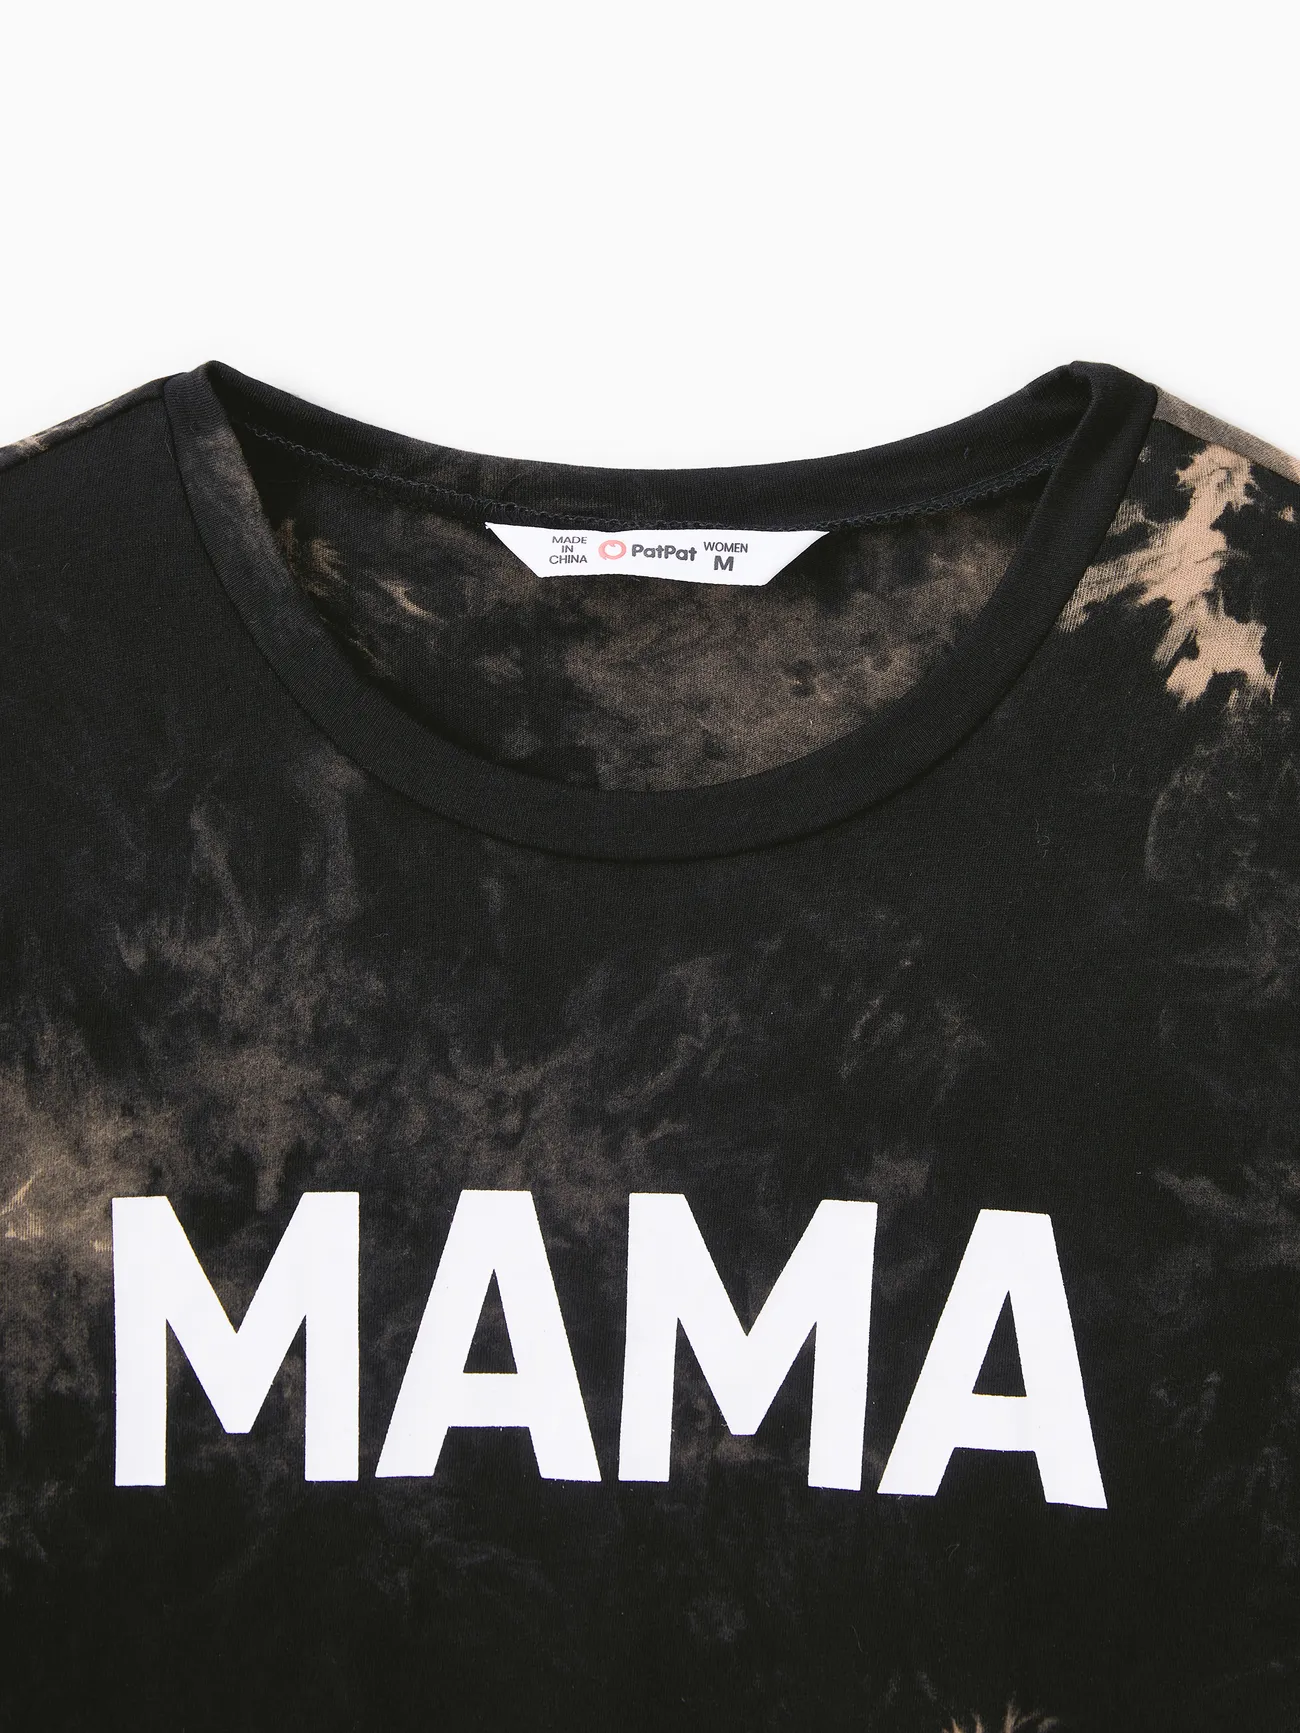 100% Cotton Short-sleeve Tie Dye Letter Print T-shirts for Mom and Me Black big image 1